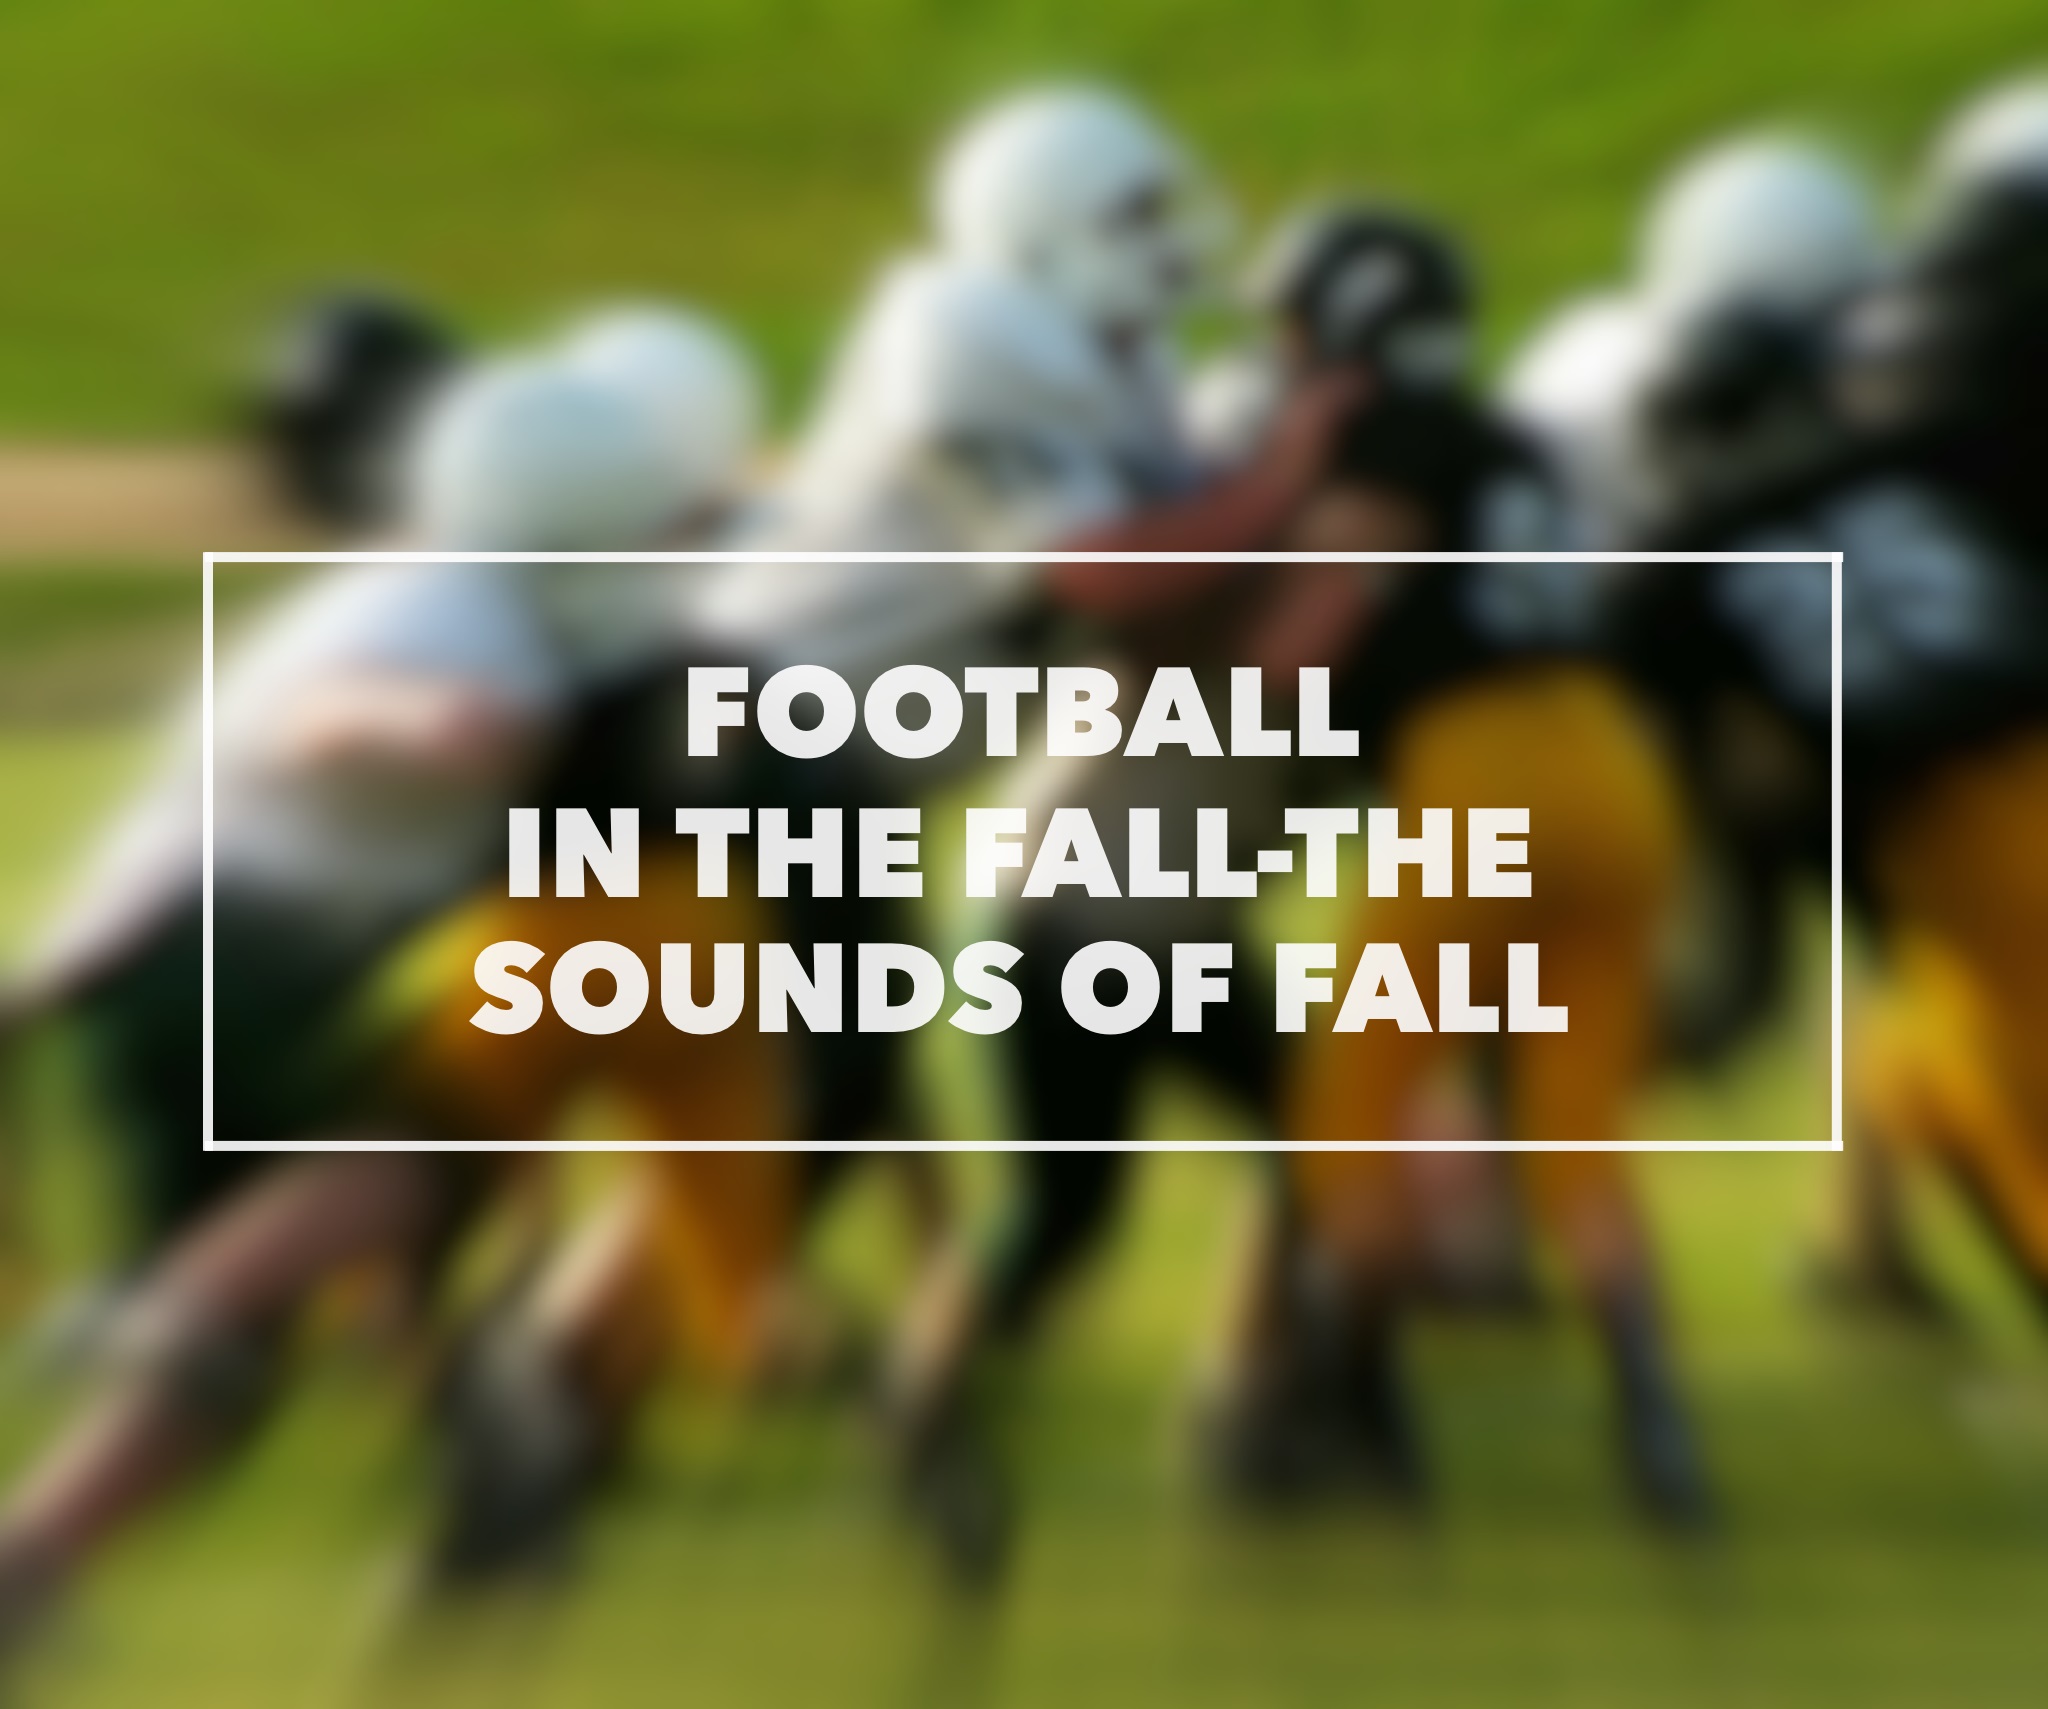 Football In The Fall-The Sounds Of Fall